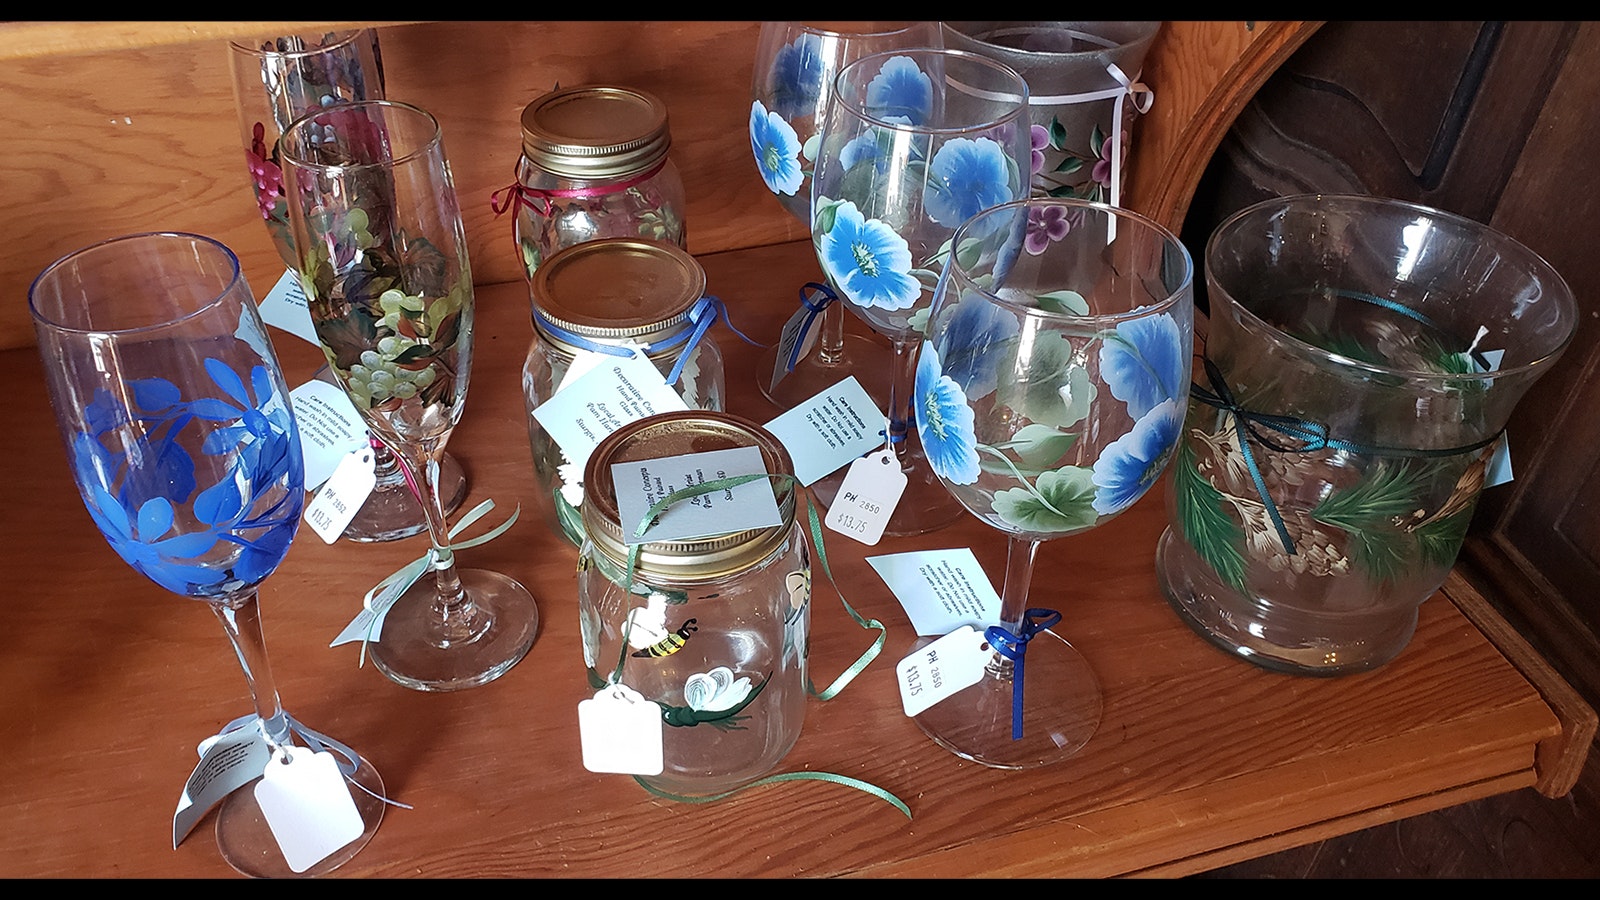 Painted wine glasses are among the hand-crafted merchandise available at the Aladdin General Store.